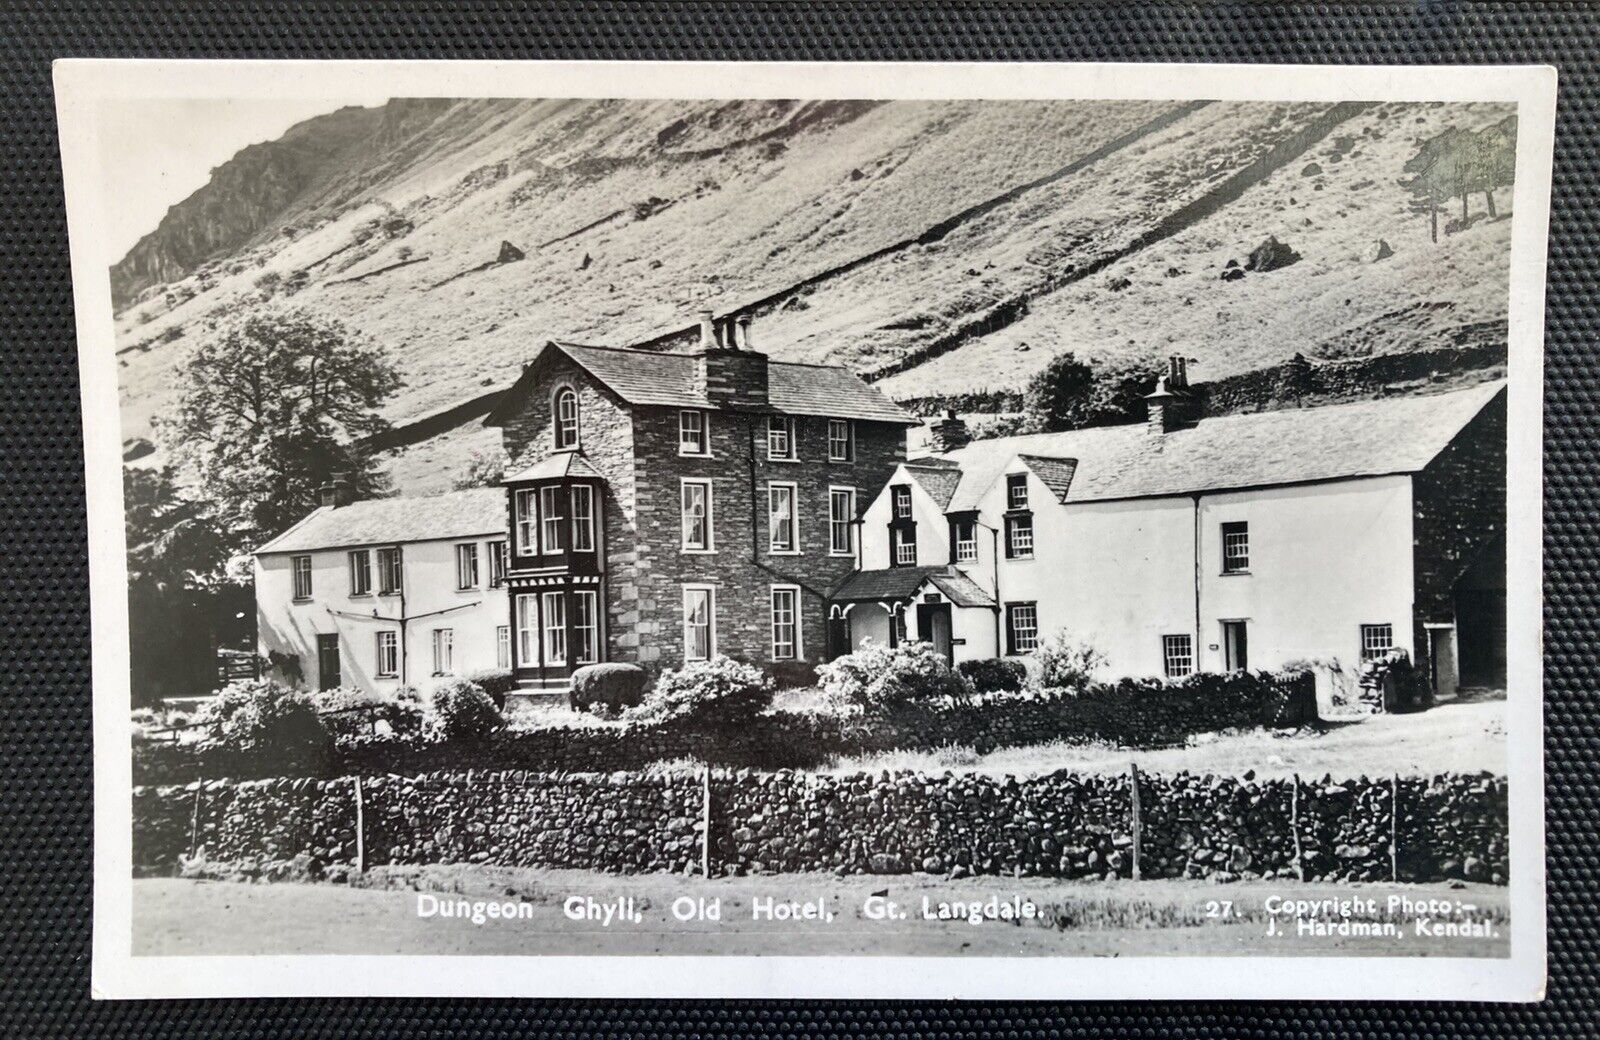 House Clearance - Dungeon Ghyll - Old Hotel - Gt. Langdale - Cumbria - A Vintage RP Service